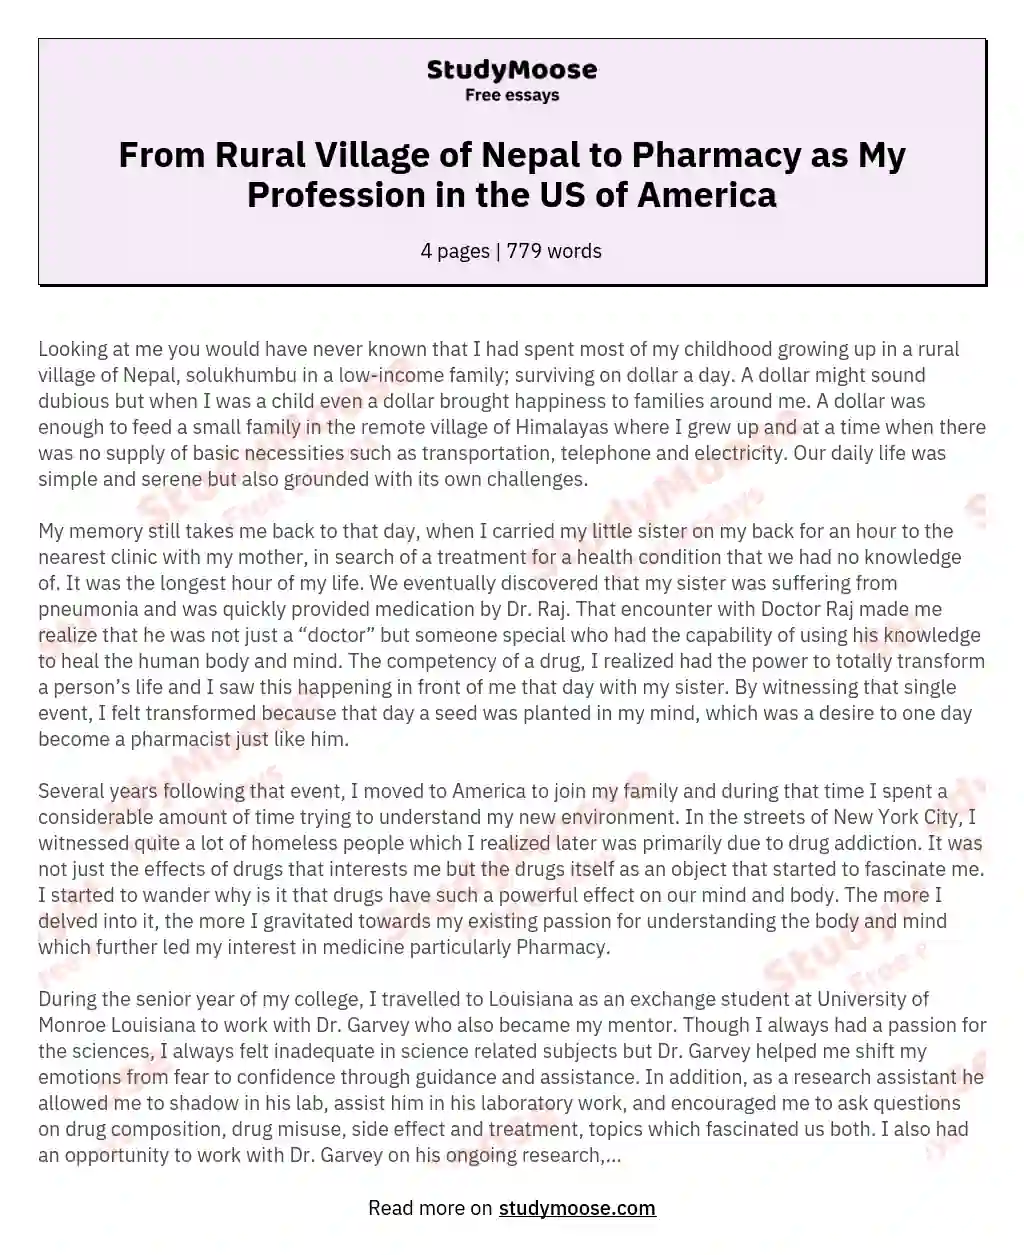 From Rural Village of Nepal to Pharmacy as My Profession in the US of America essay